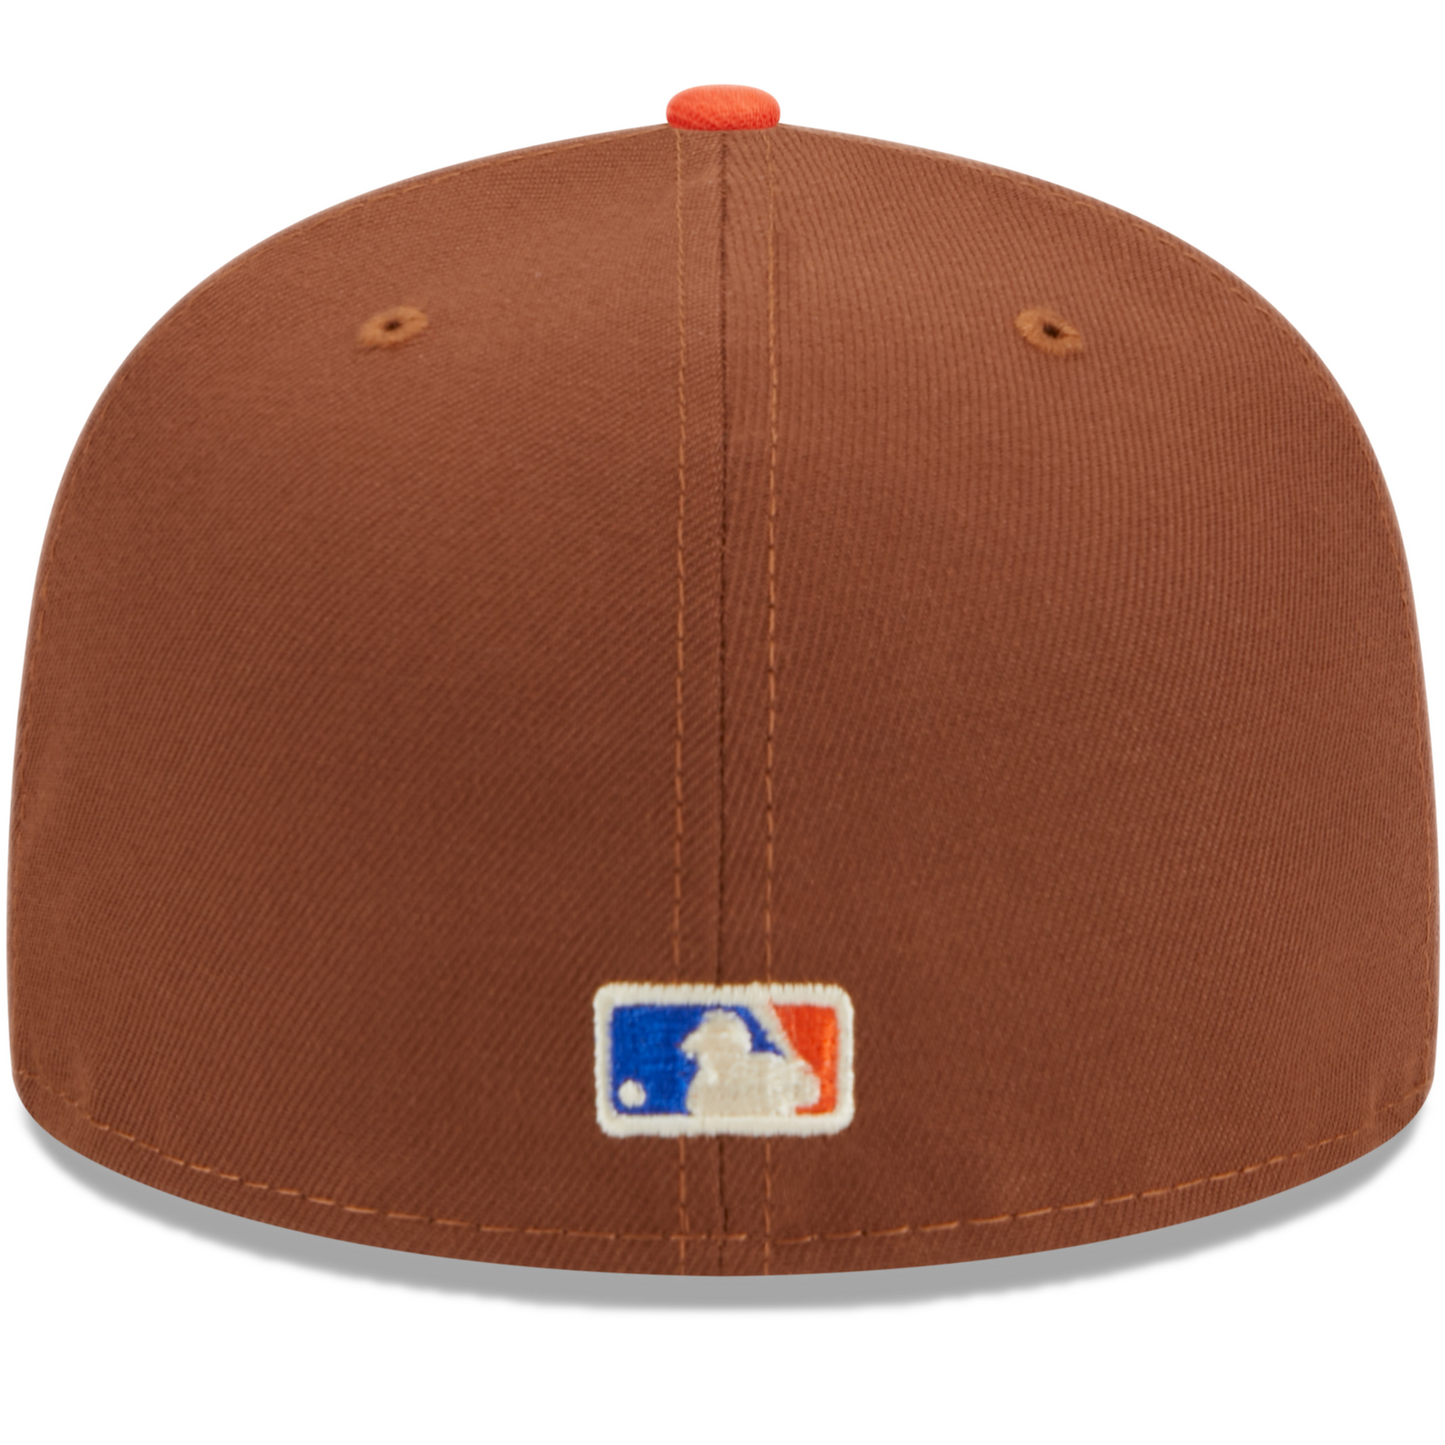 New Era New York Yankees 59FIFTY Fitted Hat - Brown/ Orange